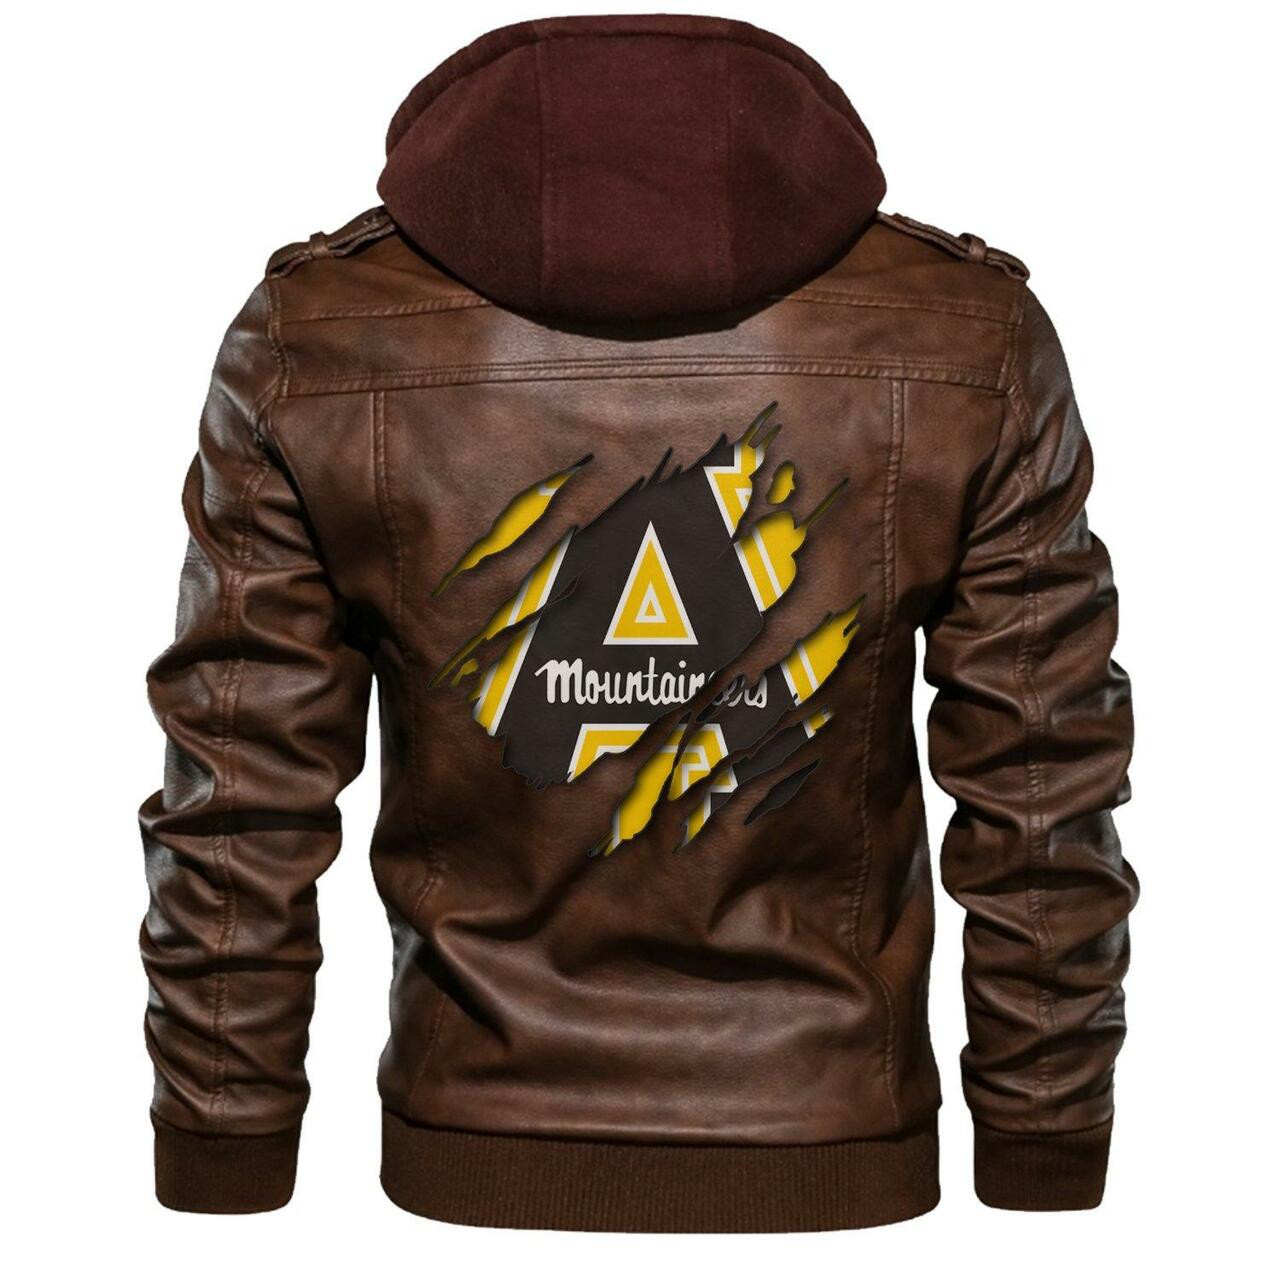 These Amazing Leather Jacket will add to the appeal of your outfit 265